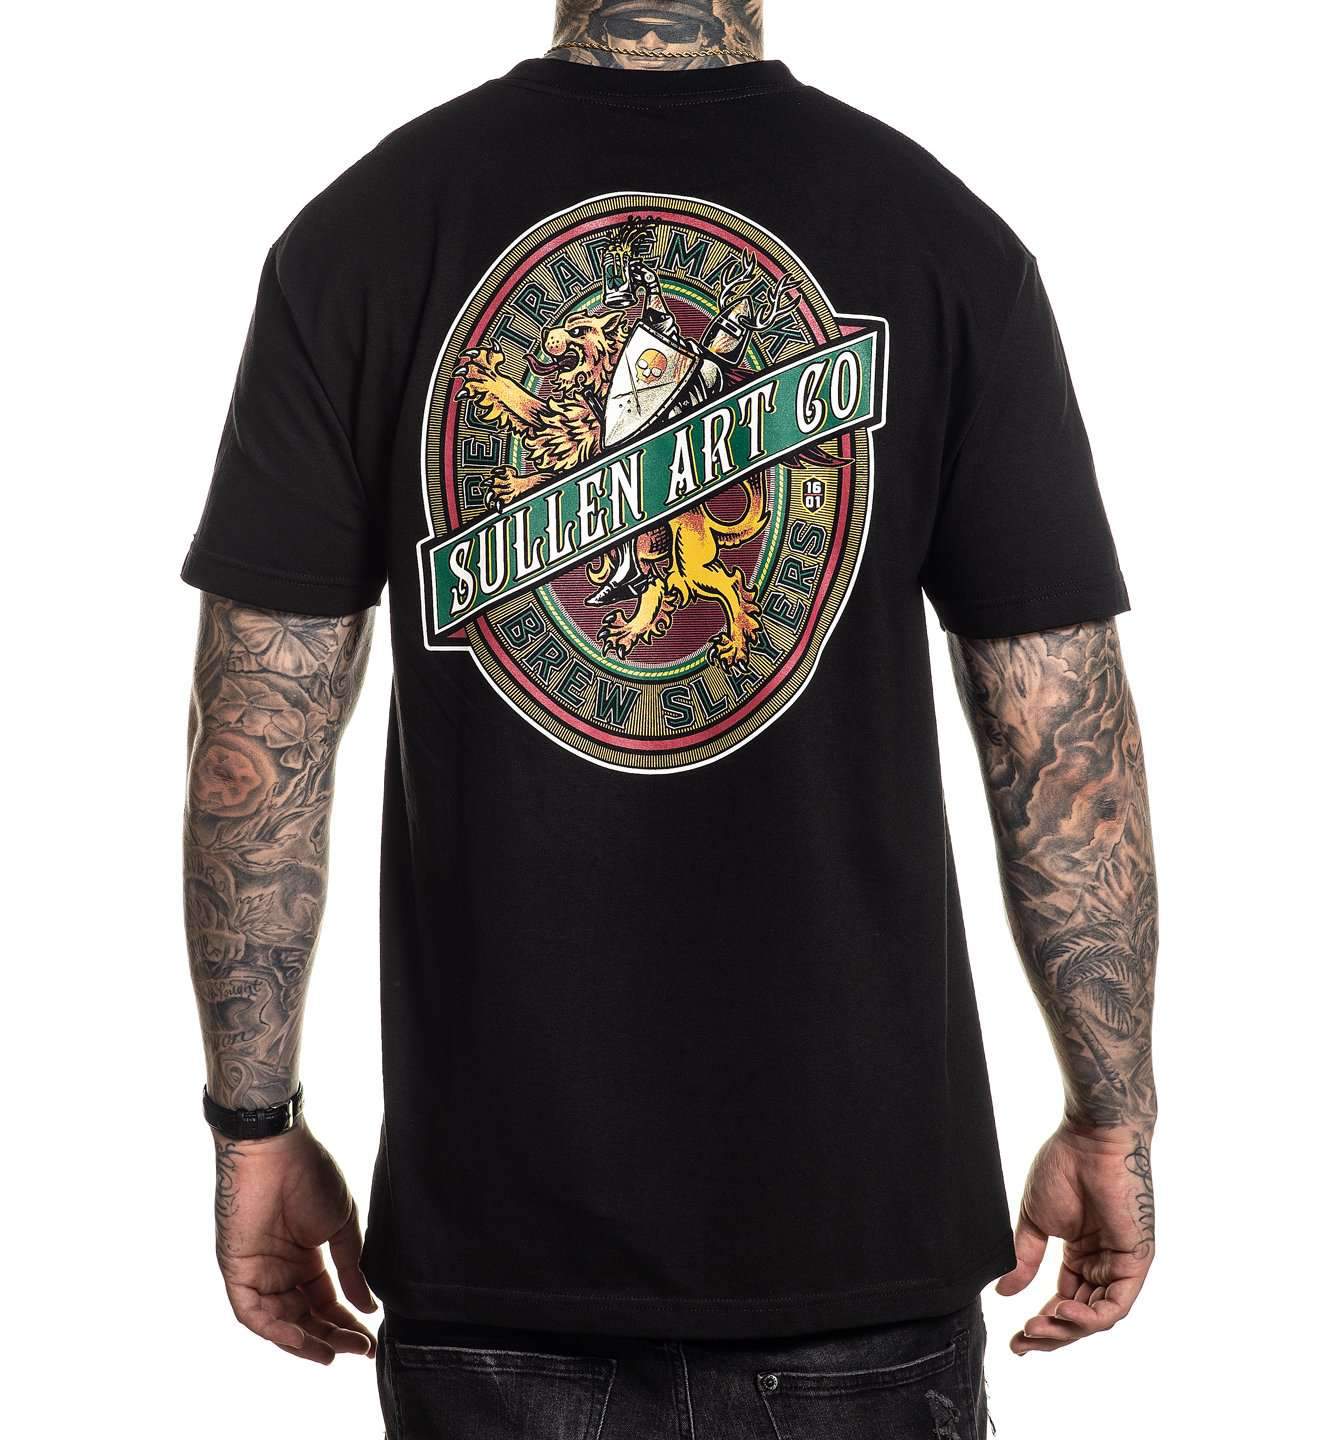 Slayered T-Shirt by Sullen